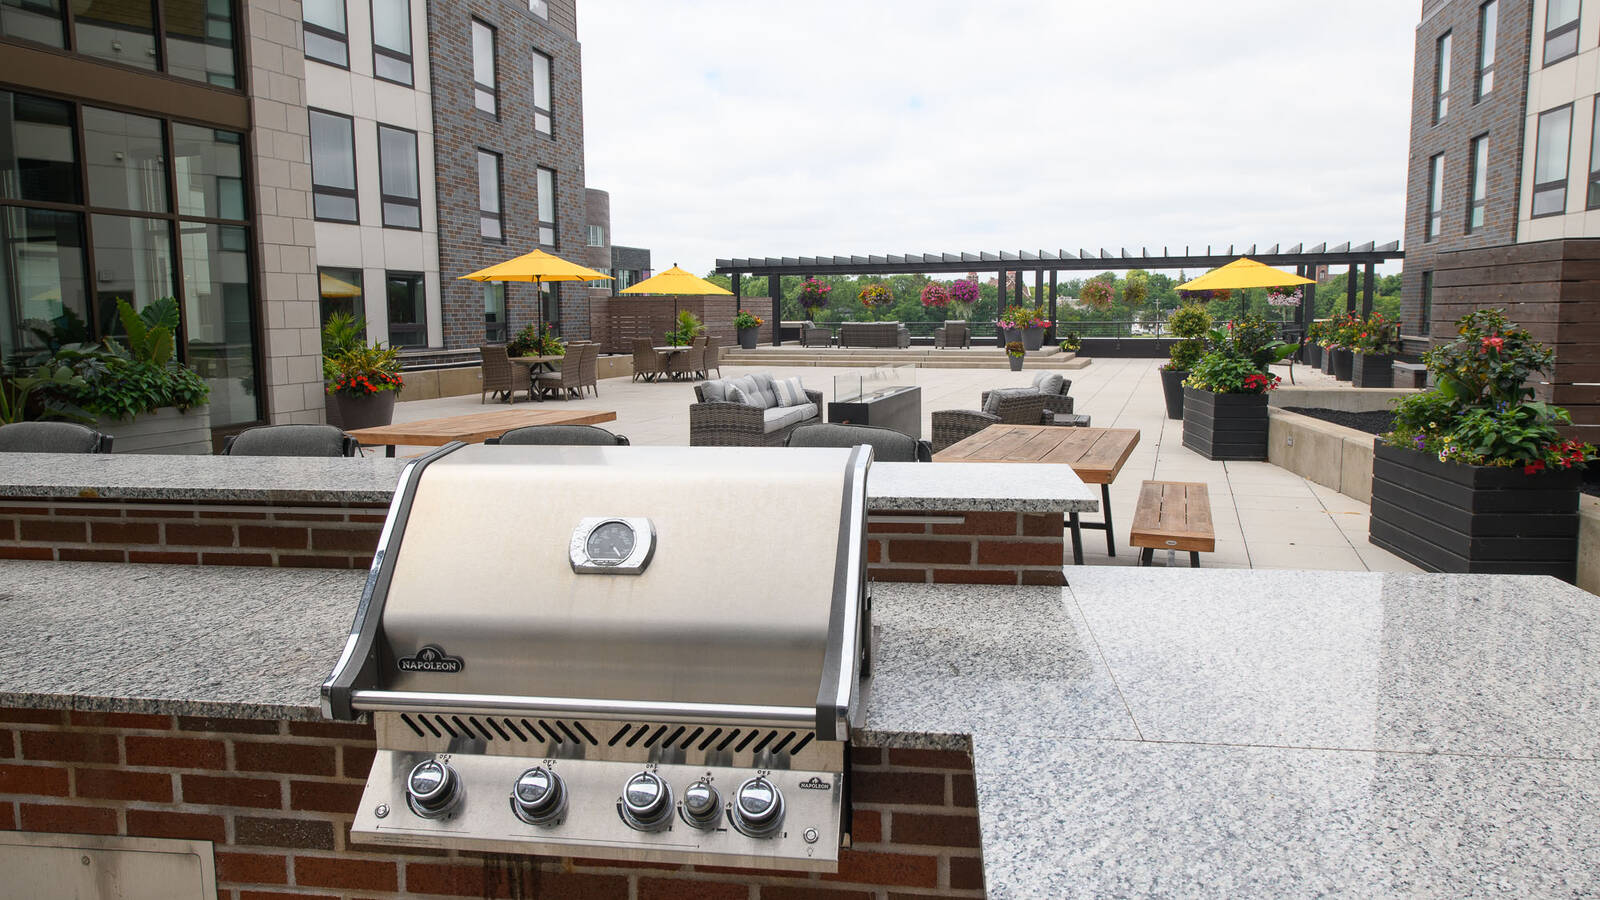 Haymarket Landing patio deck with view of grills for resident use and plenty of outdoor seating